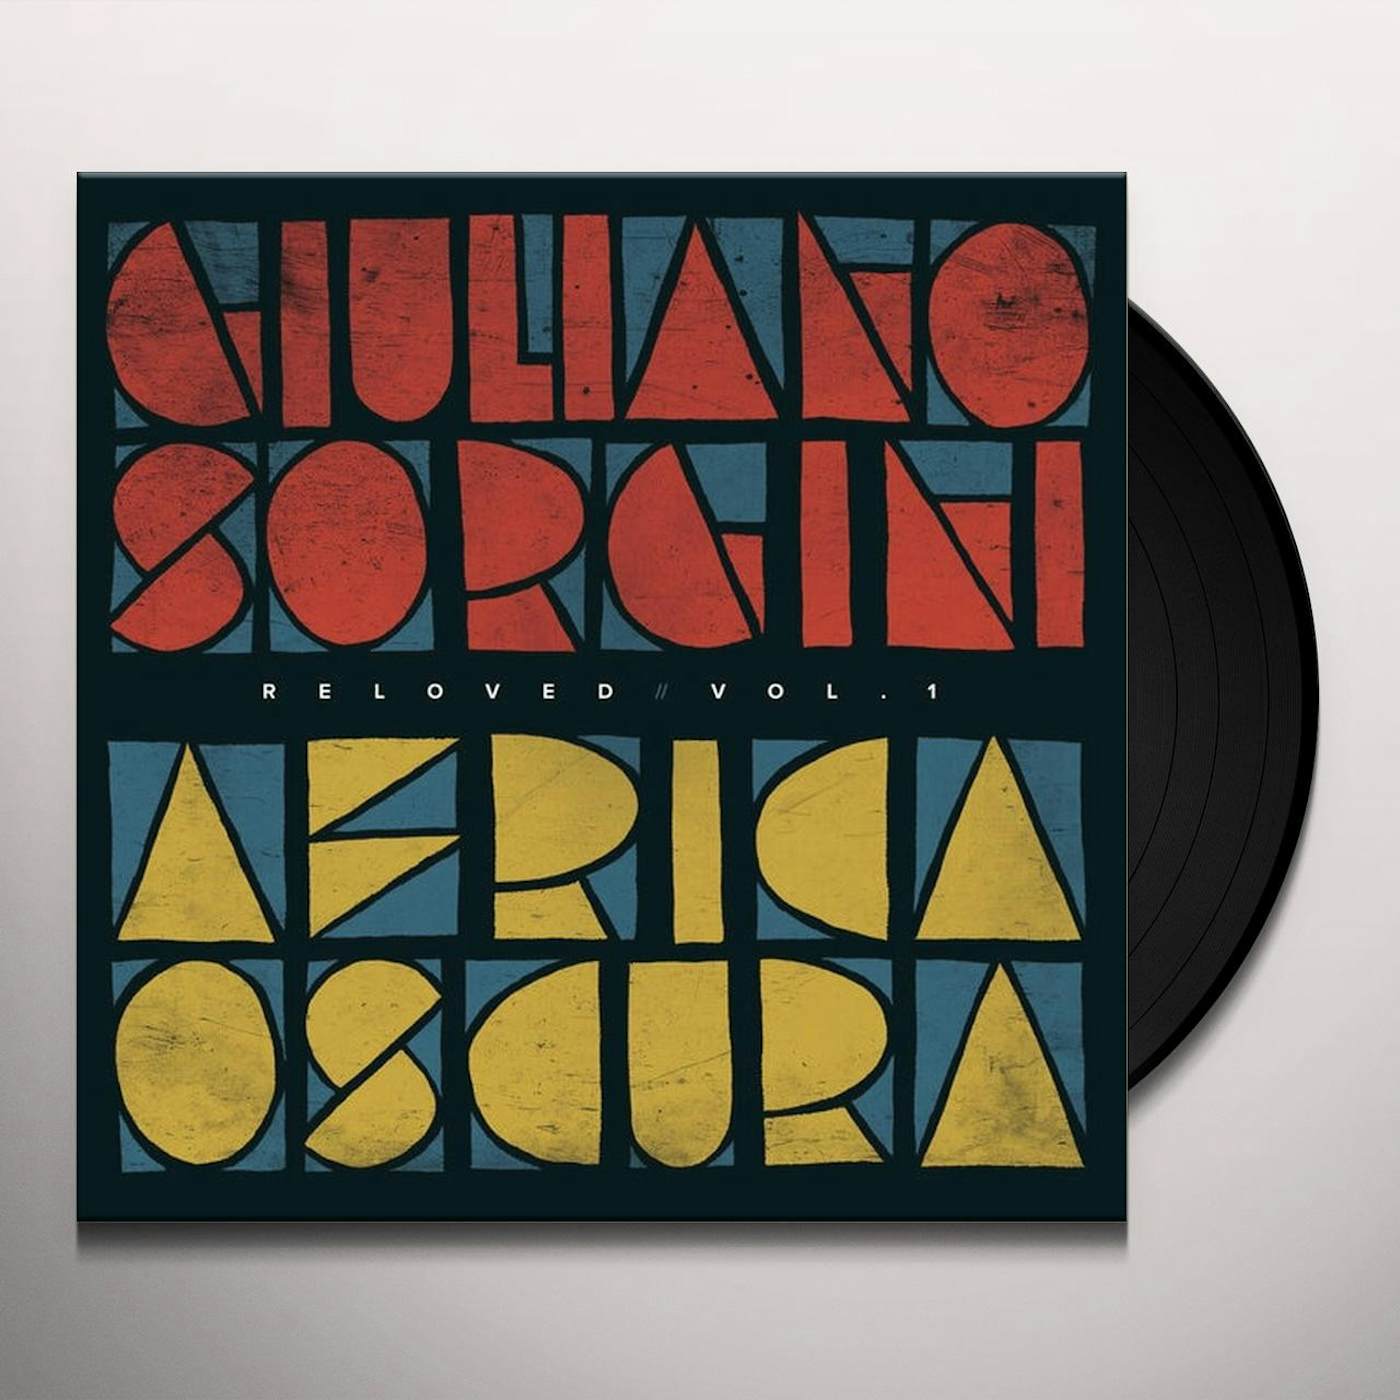 AFRICA OSCURA RELOVED VOL. 1 / VARIOUS Vinyl Record